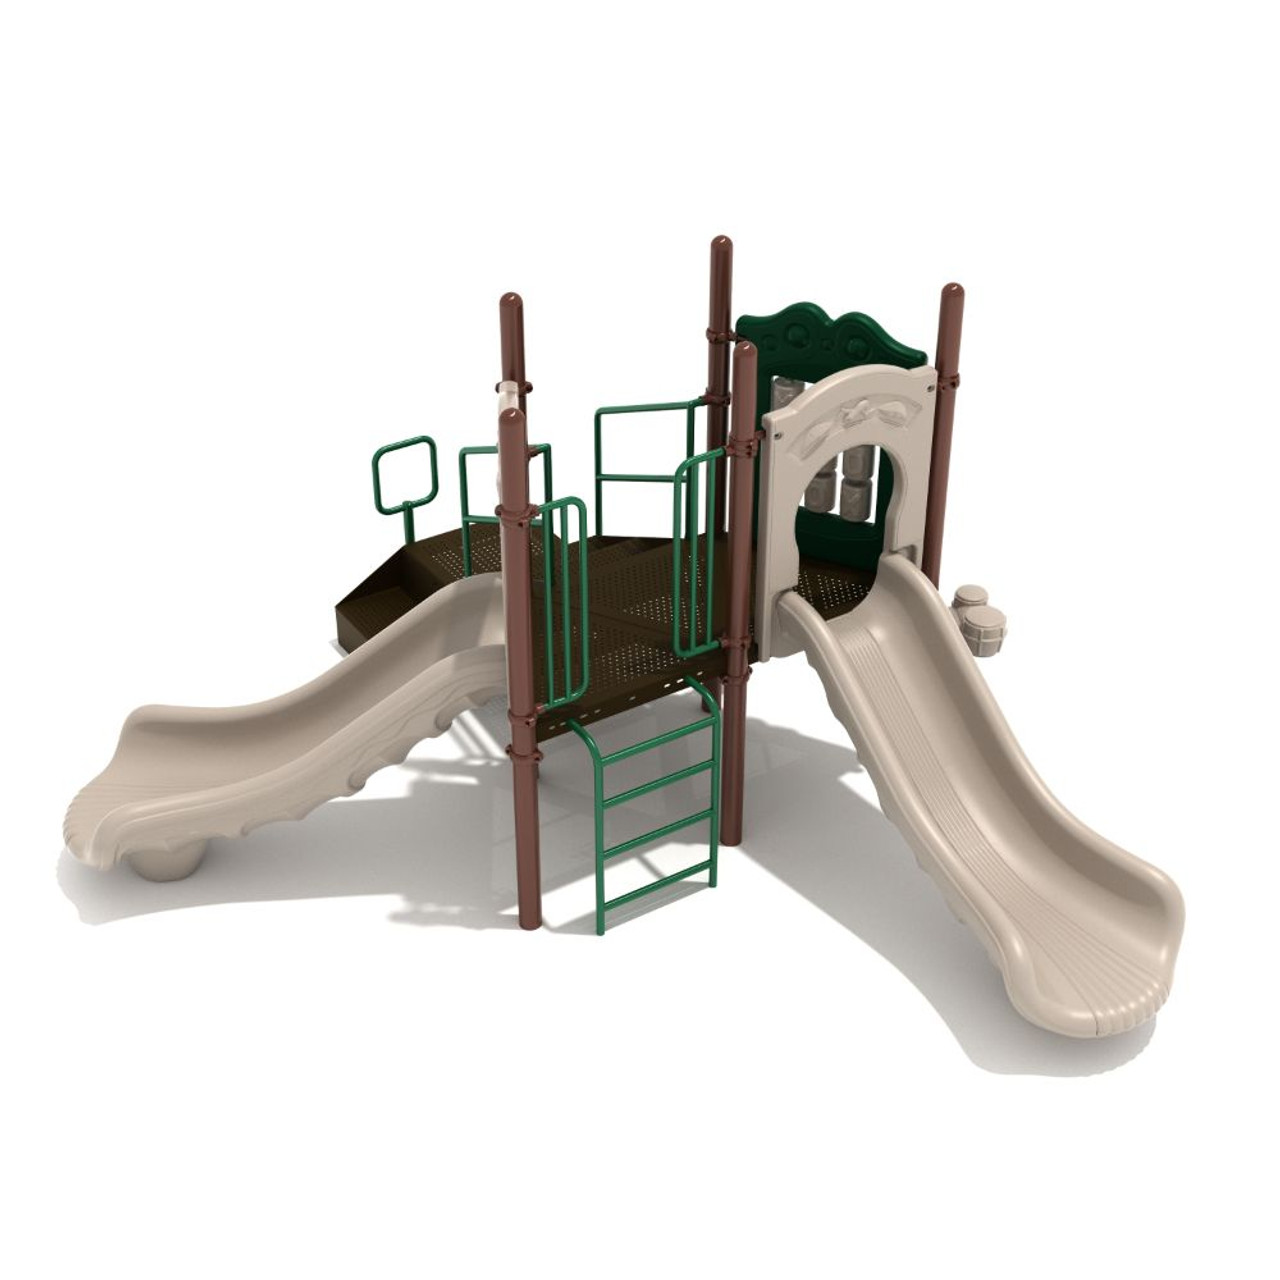 Madison Playset - other color